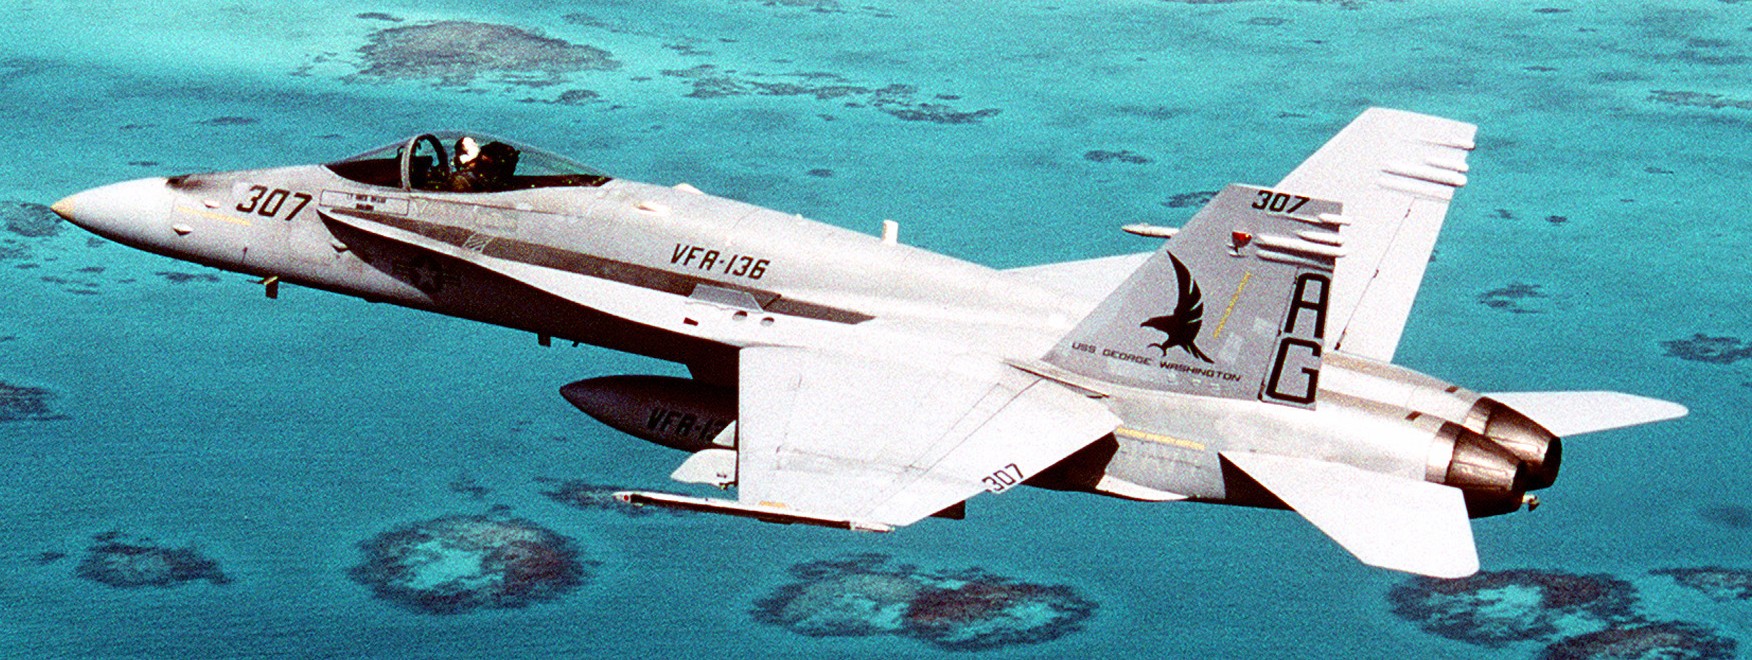 vfa-136 knighthawks strike fighter squadron f/a-18c hornet 1992 81 cvw-7 naval station roosevelt roads puerto rico